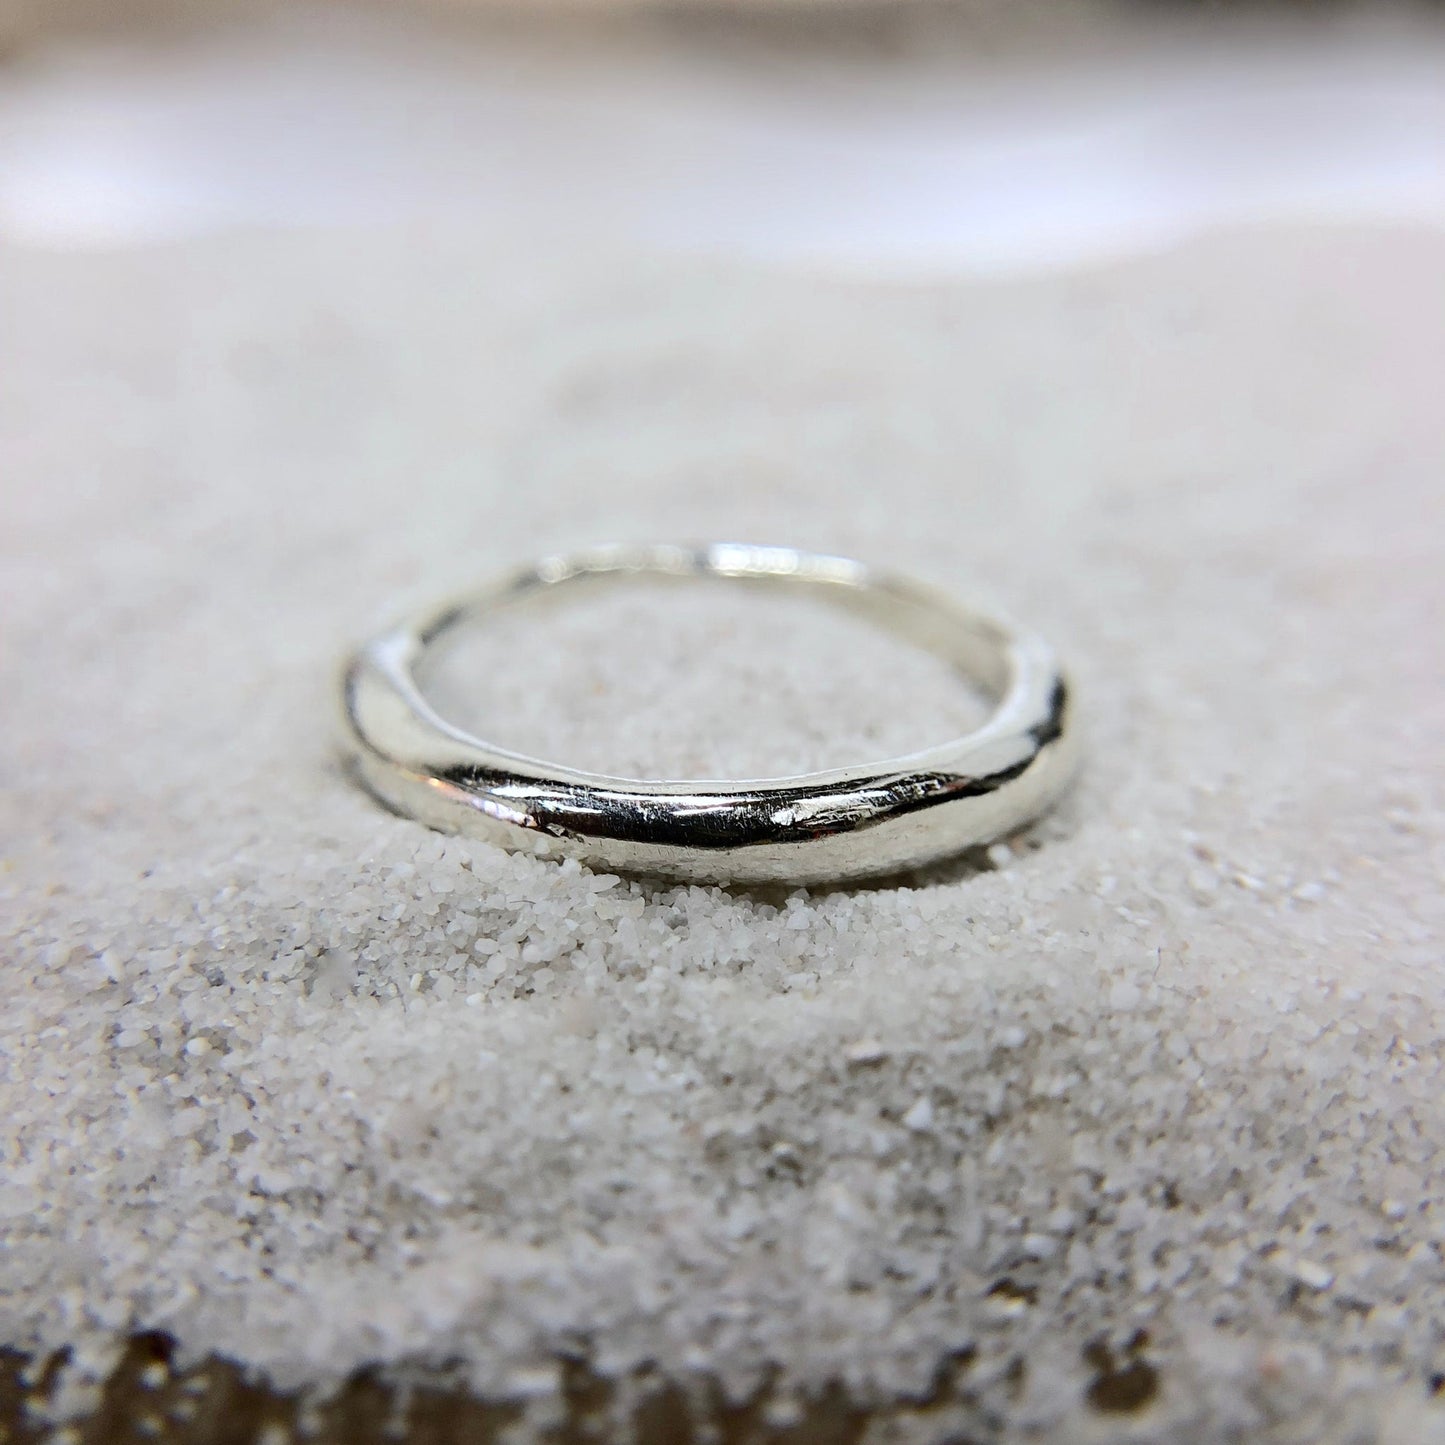 tidal ring by amanda hunt / A simple organic stacking ring inspired by the rising & falling, ebbing & flowing of the ocean tides. Available in sterling silver in a variety of sizes. A beautiful every day piece.